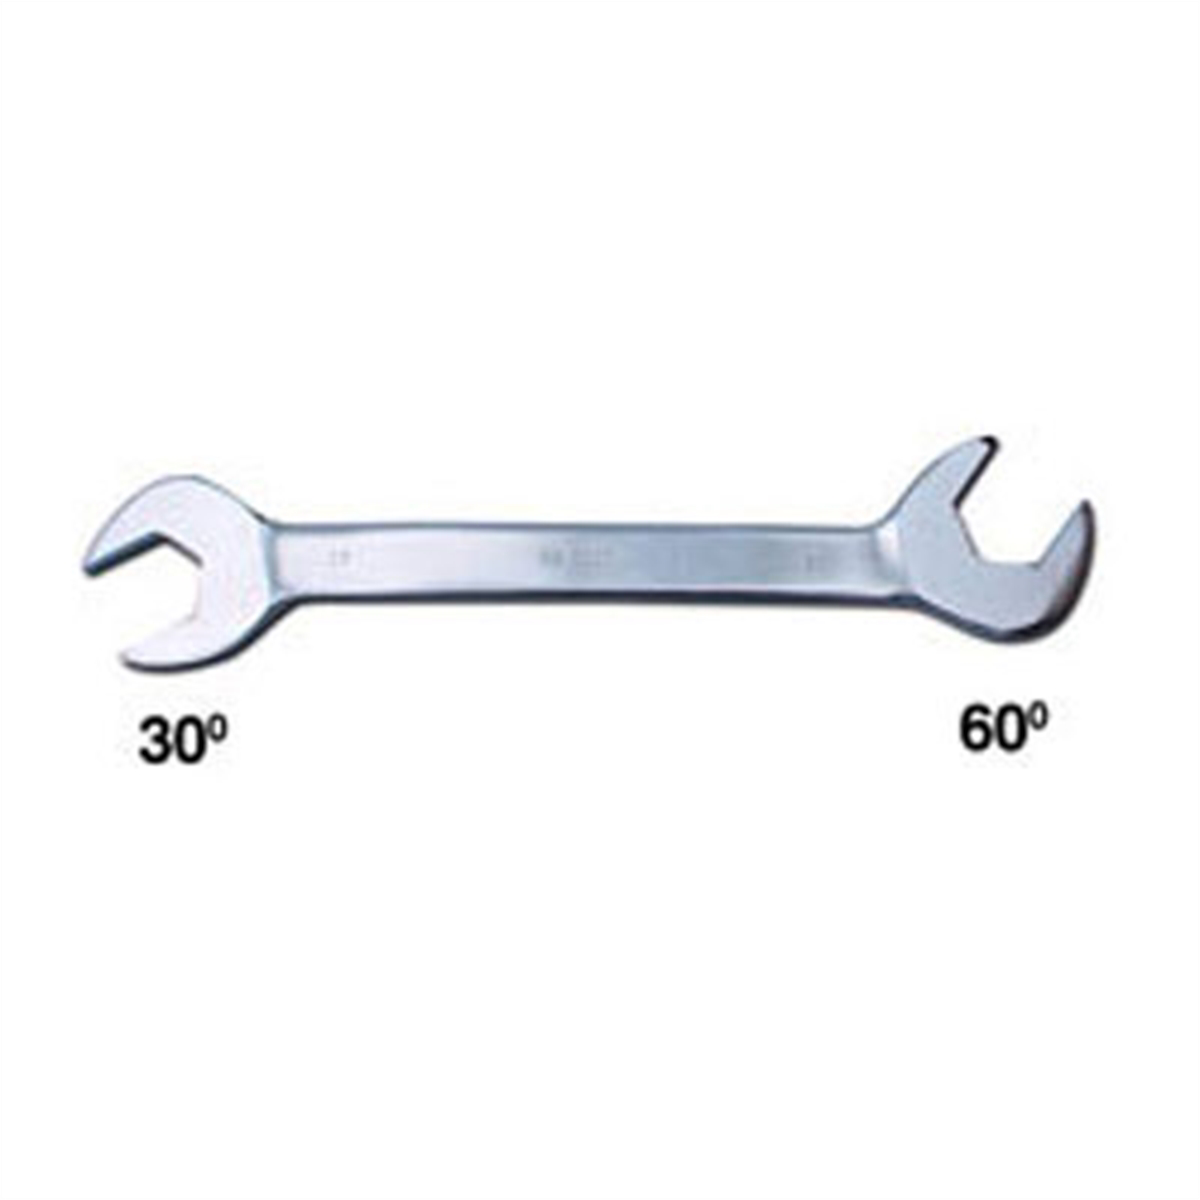 10mm Angle Wrench